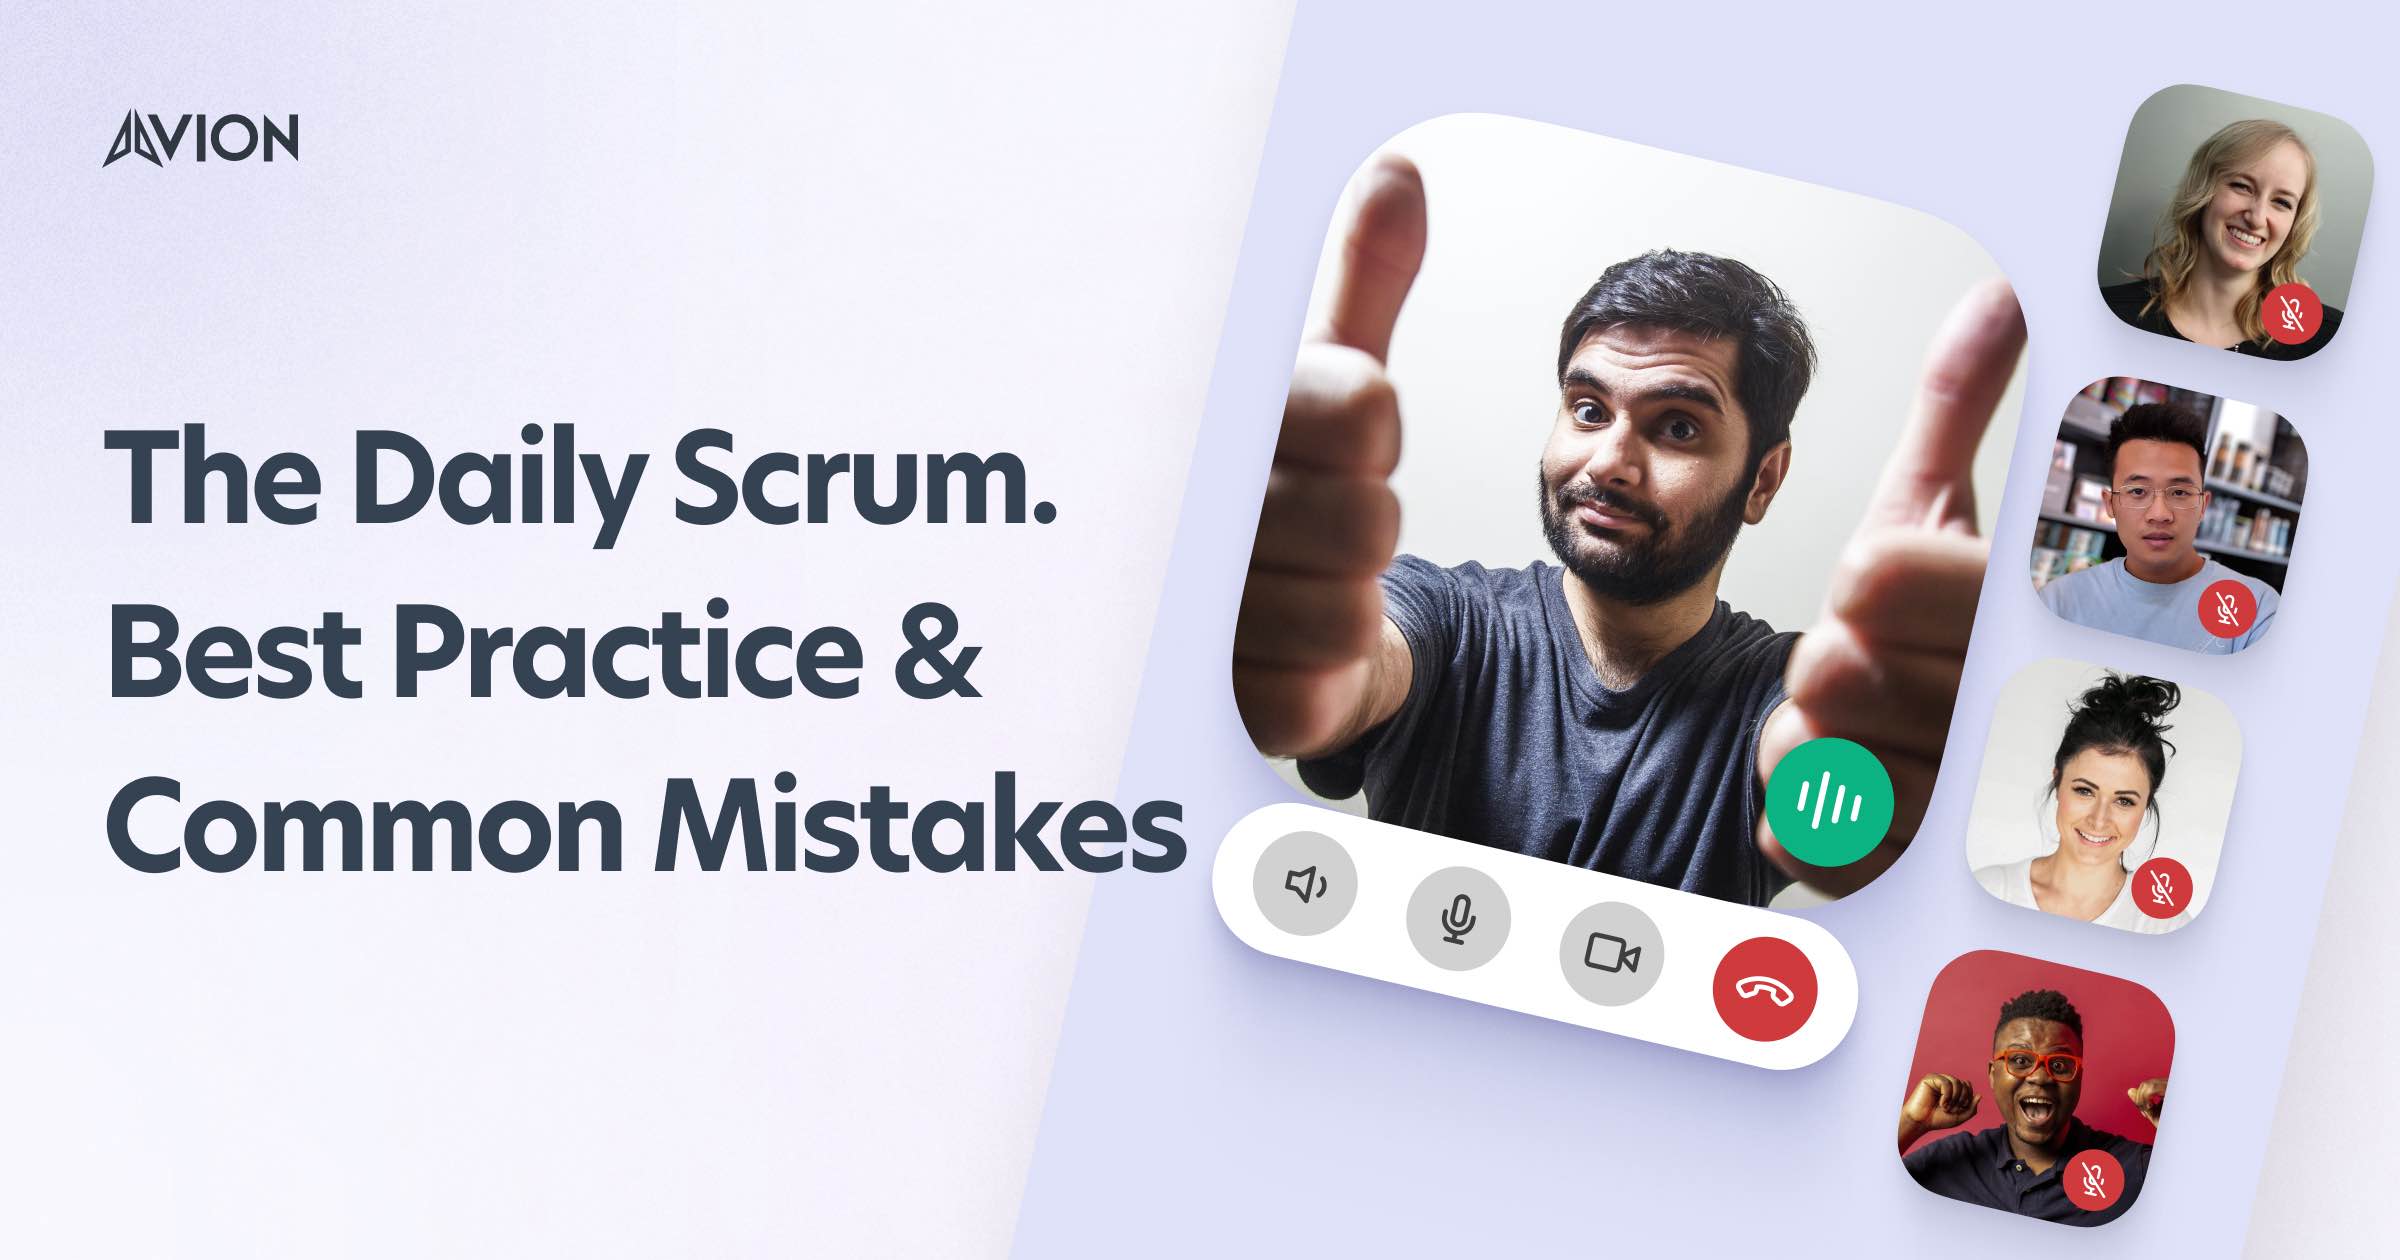 The Daily Scrum guide — checklist, best practice & common mistakes